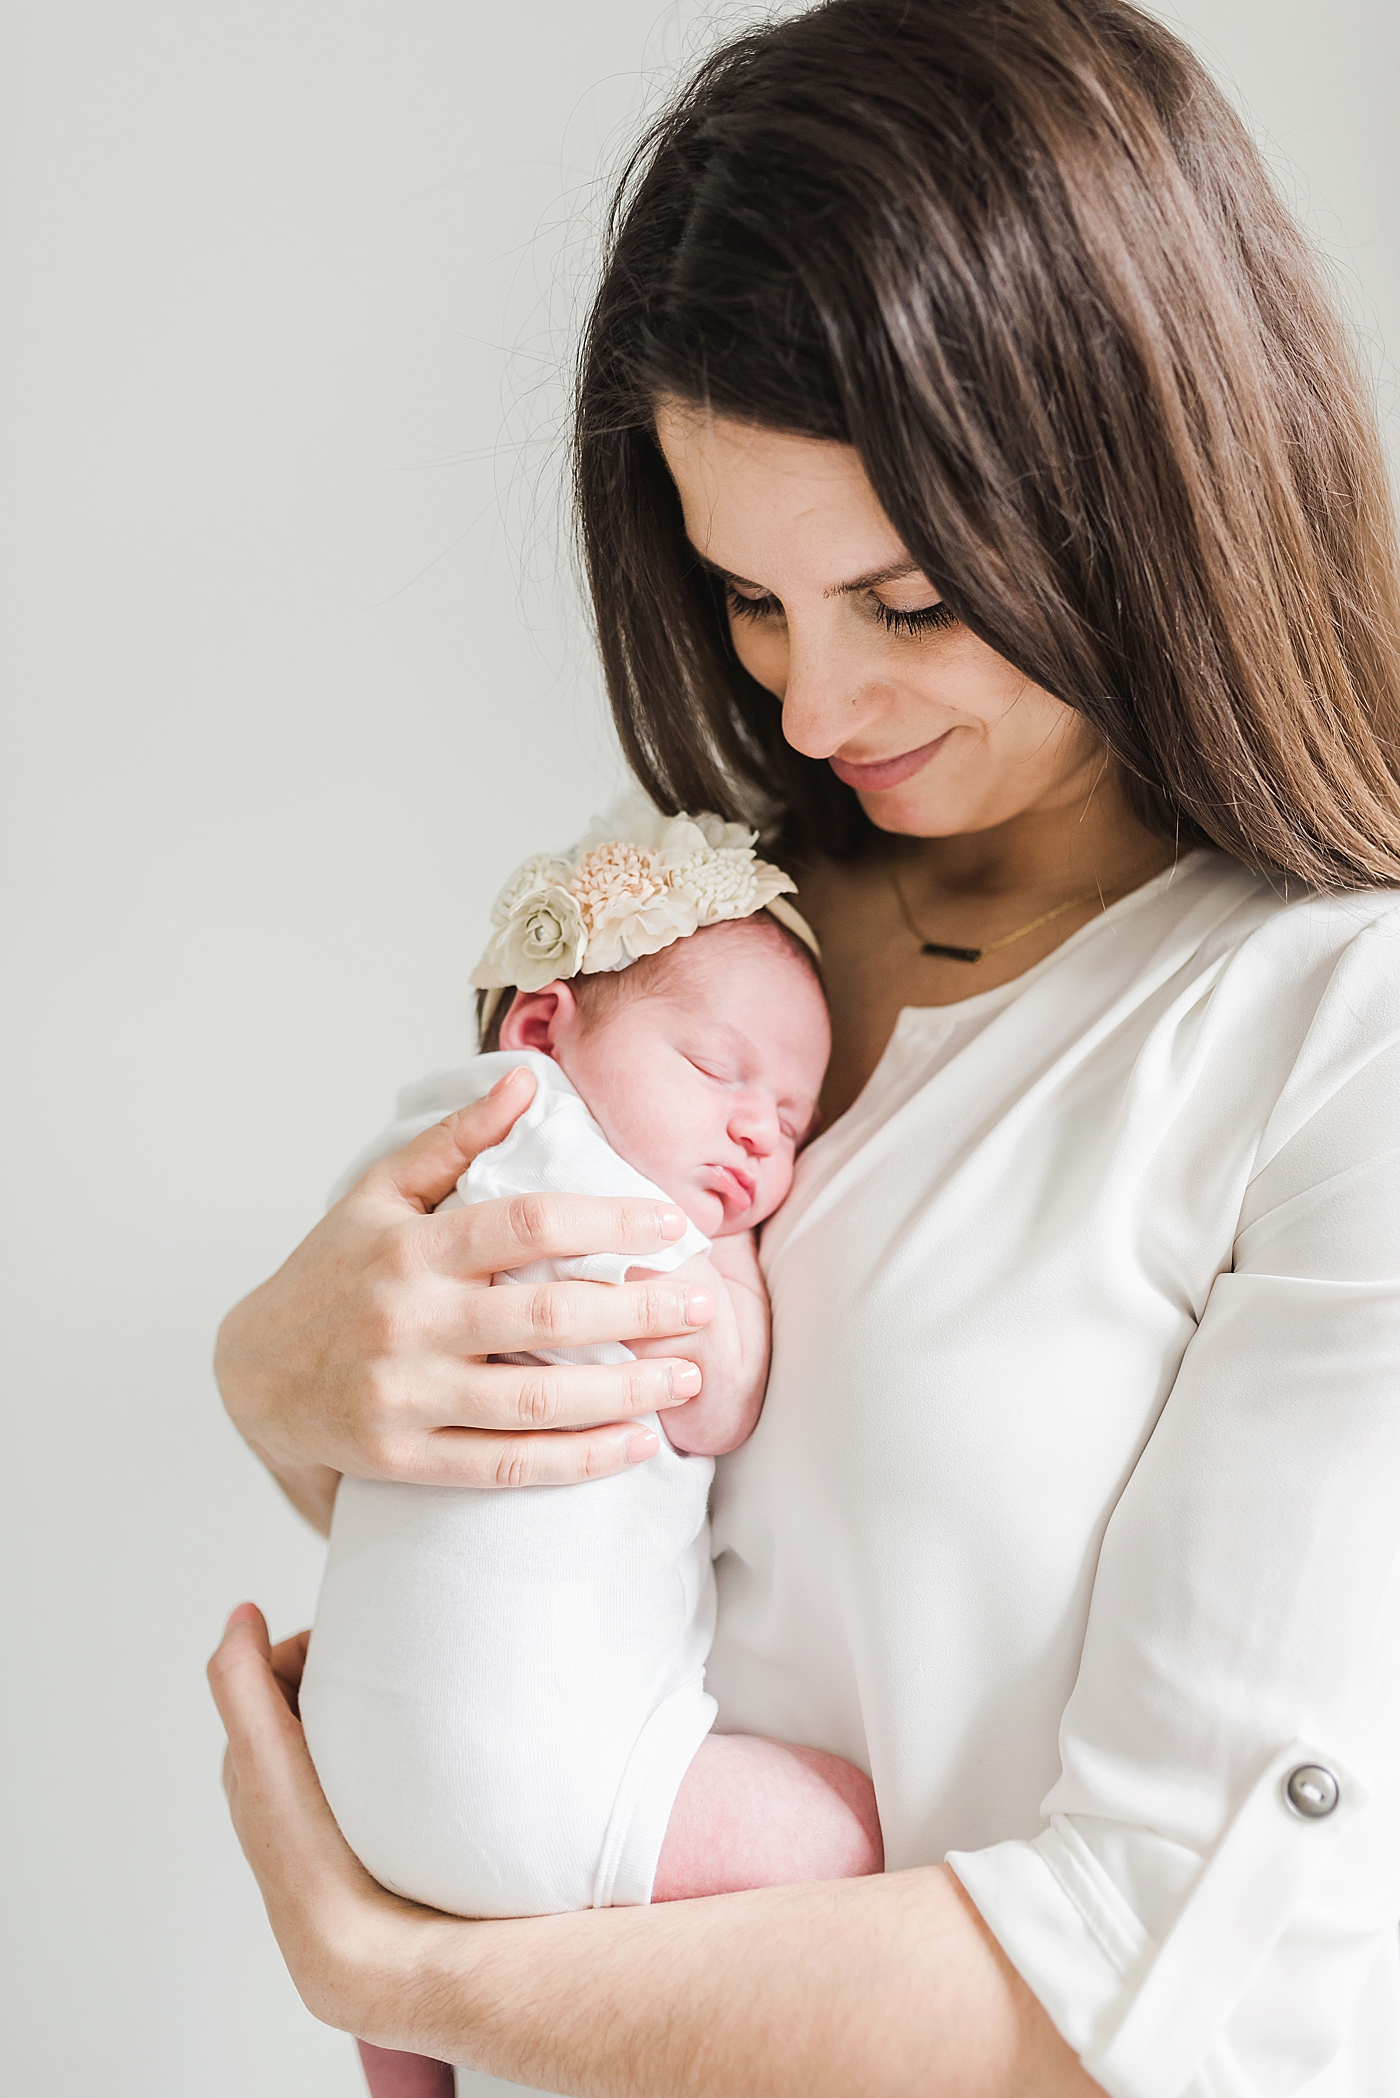 Mom holding her newborn baby girl | Photo by Anna Wisjo Photography